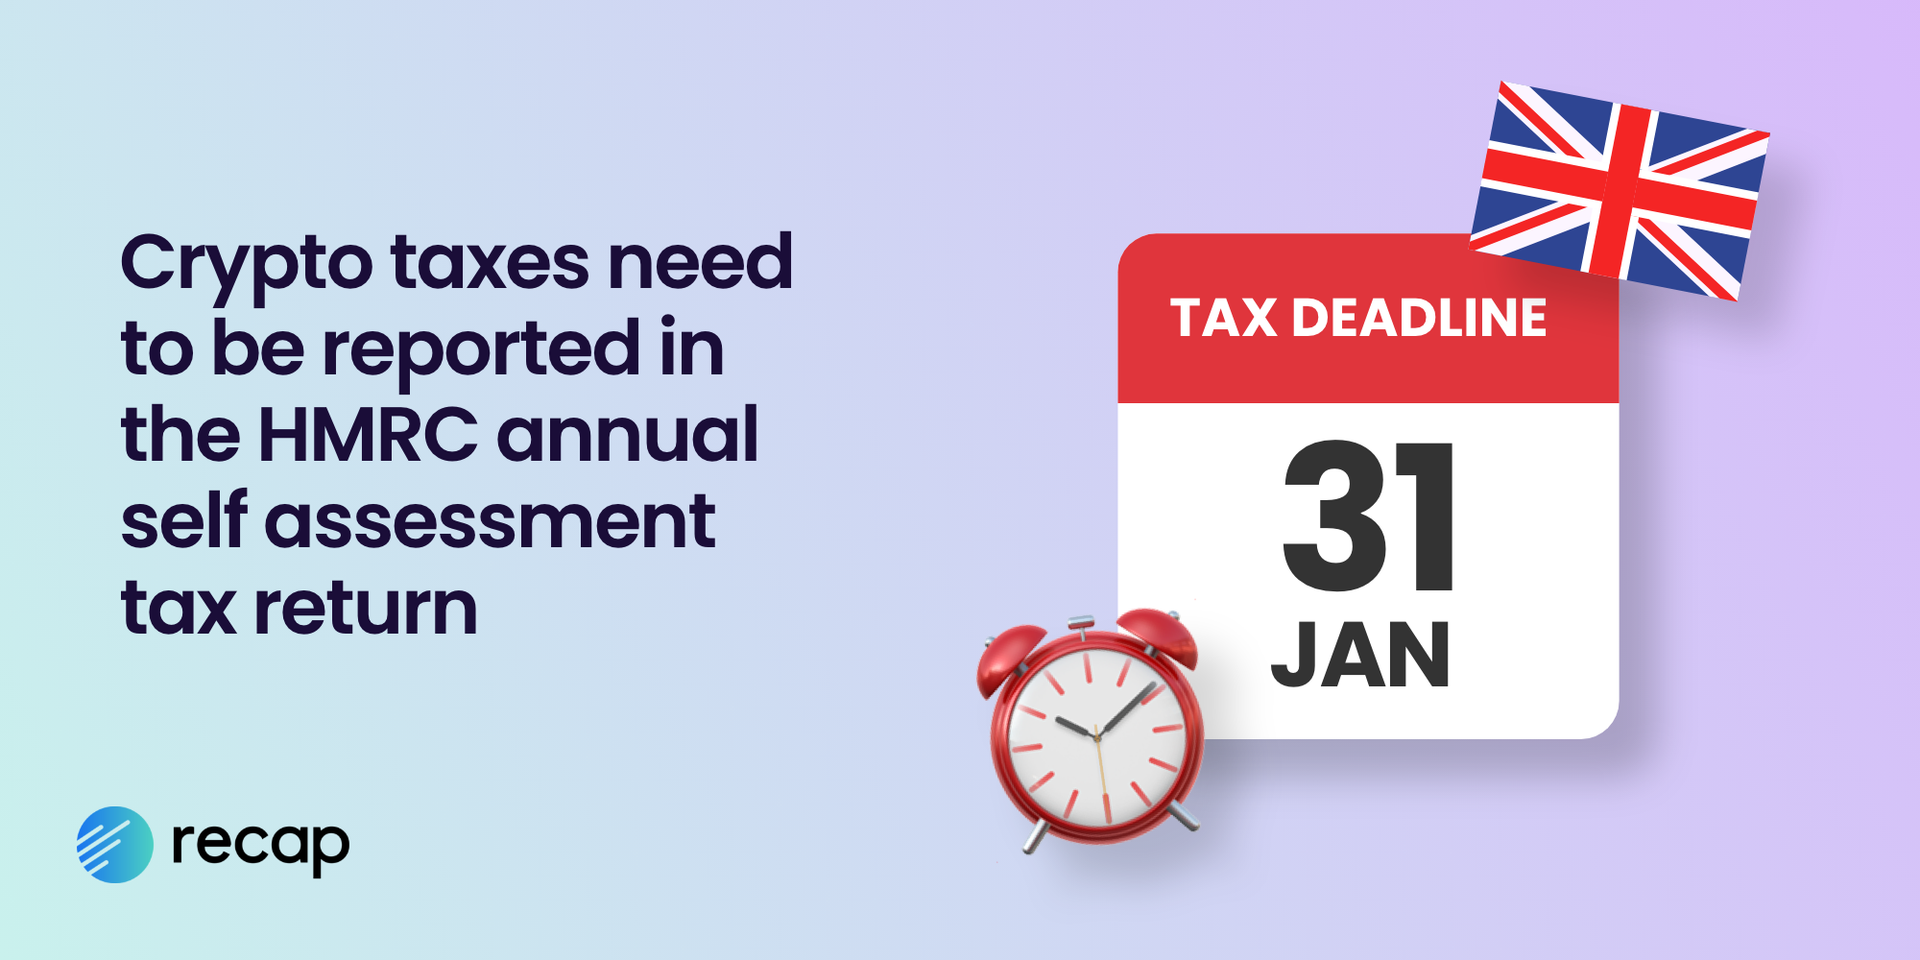 Infographic stating that that the UK tax deadline is 31st January and crypto taxes need to be reported in the HMRC annual self assessment tax return.